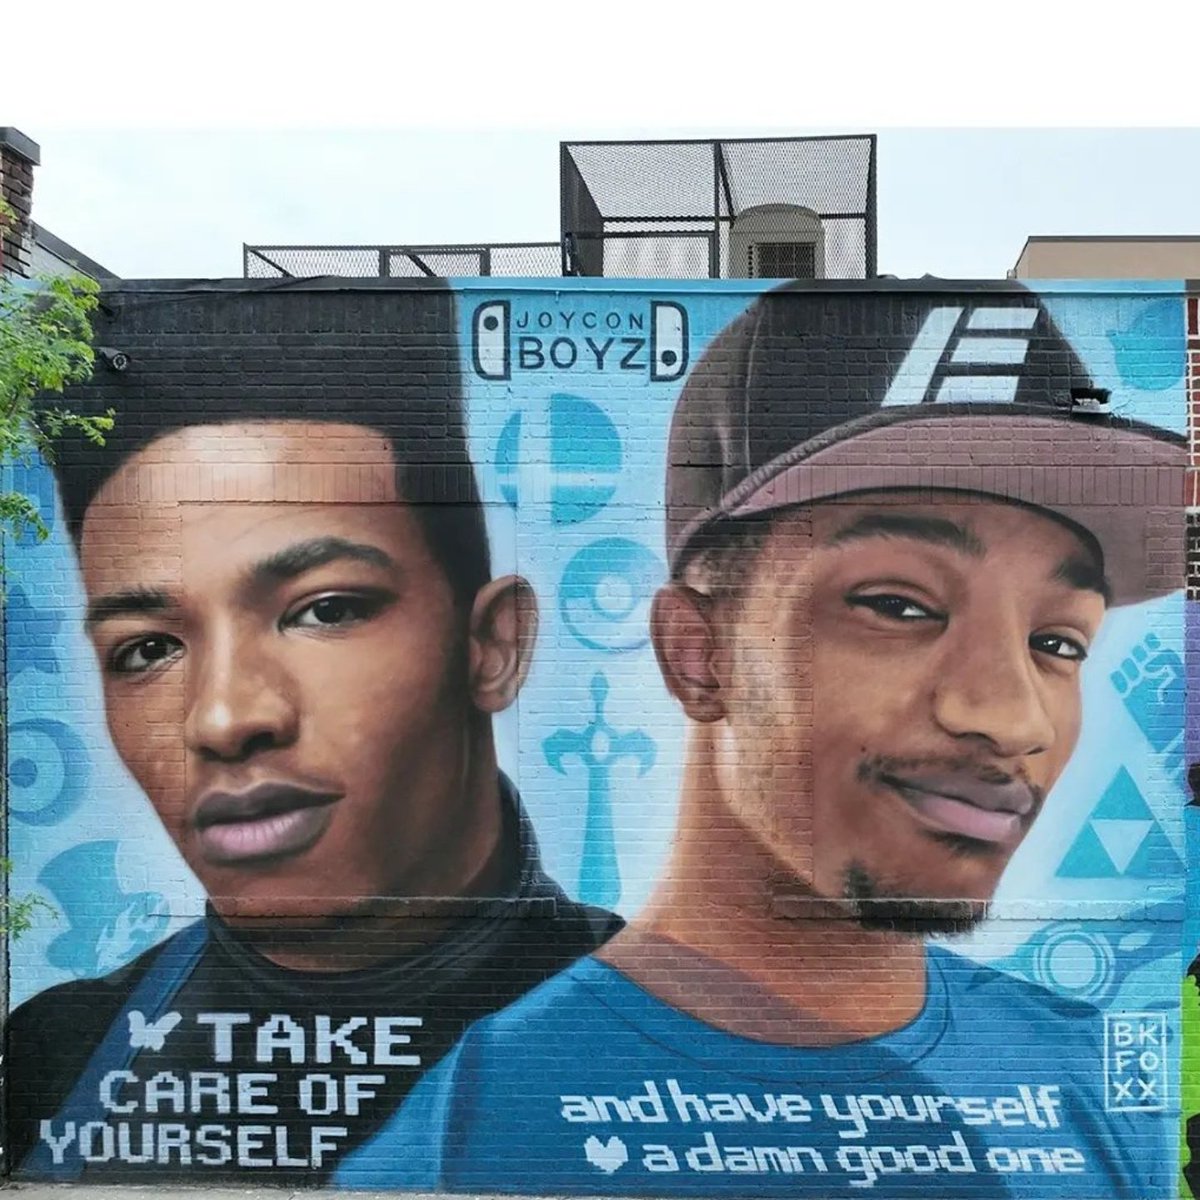 Happy birthday Etika! Your legacy lives on with all of us, and I know you're looking after us spreading much love around the world to all the joyconboyz